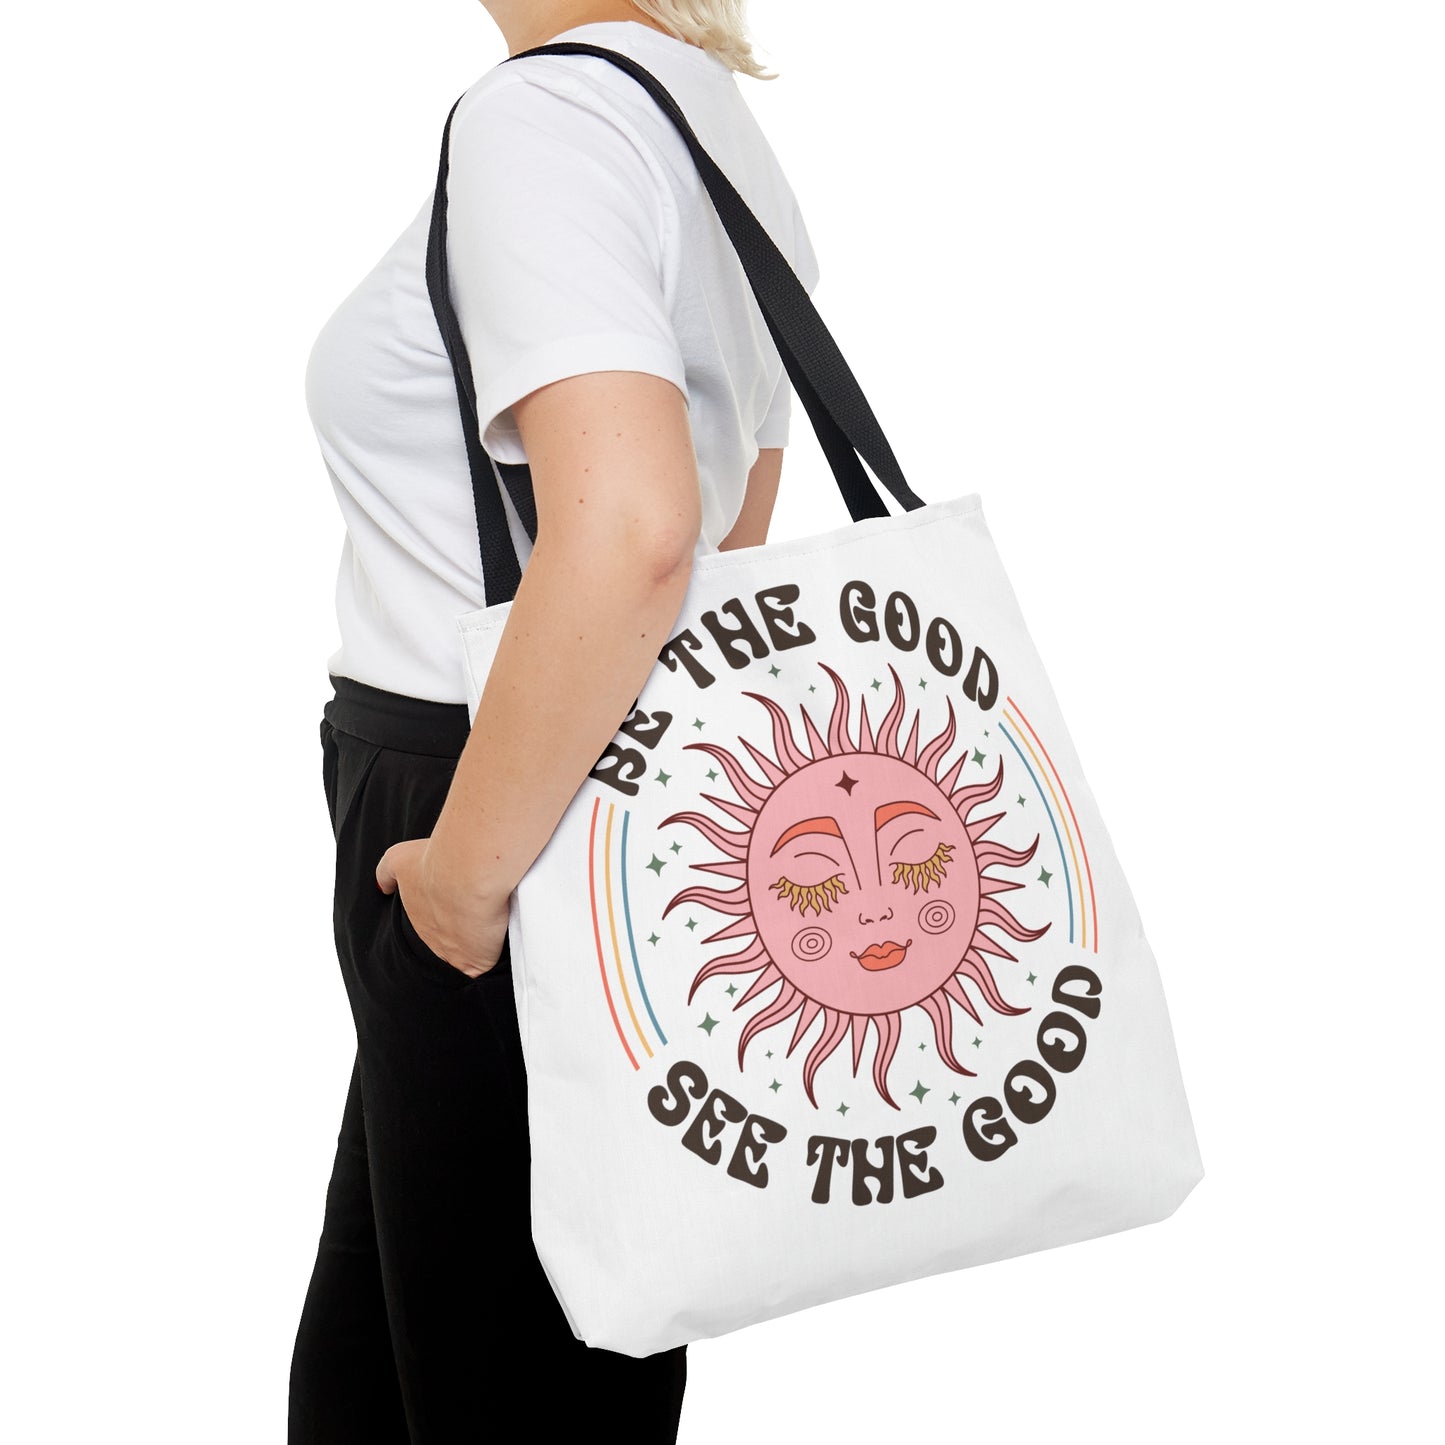 Be the Good, See the Good - Tote Bag